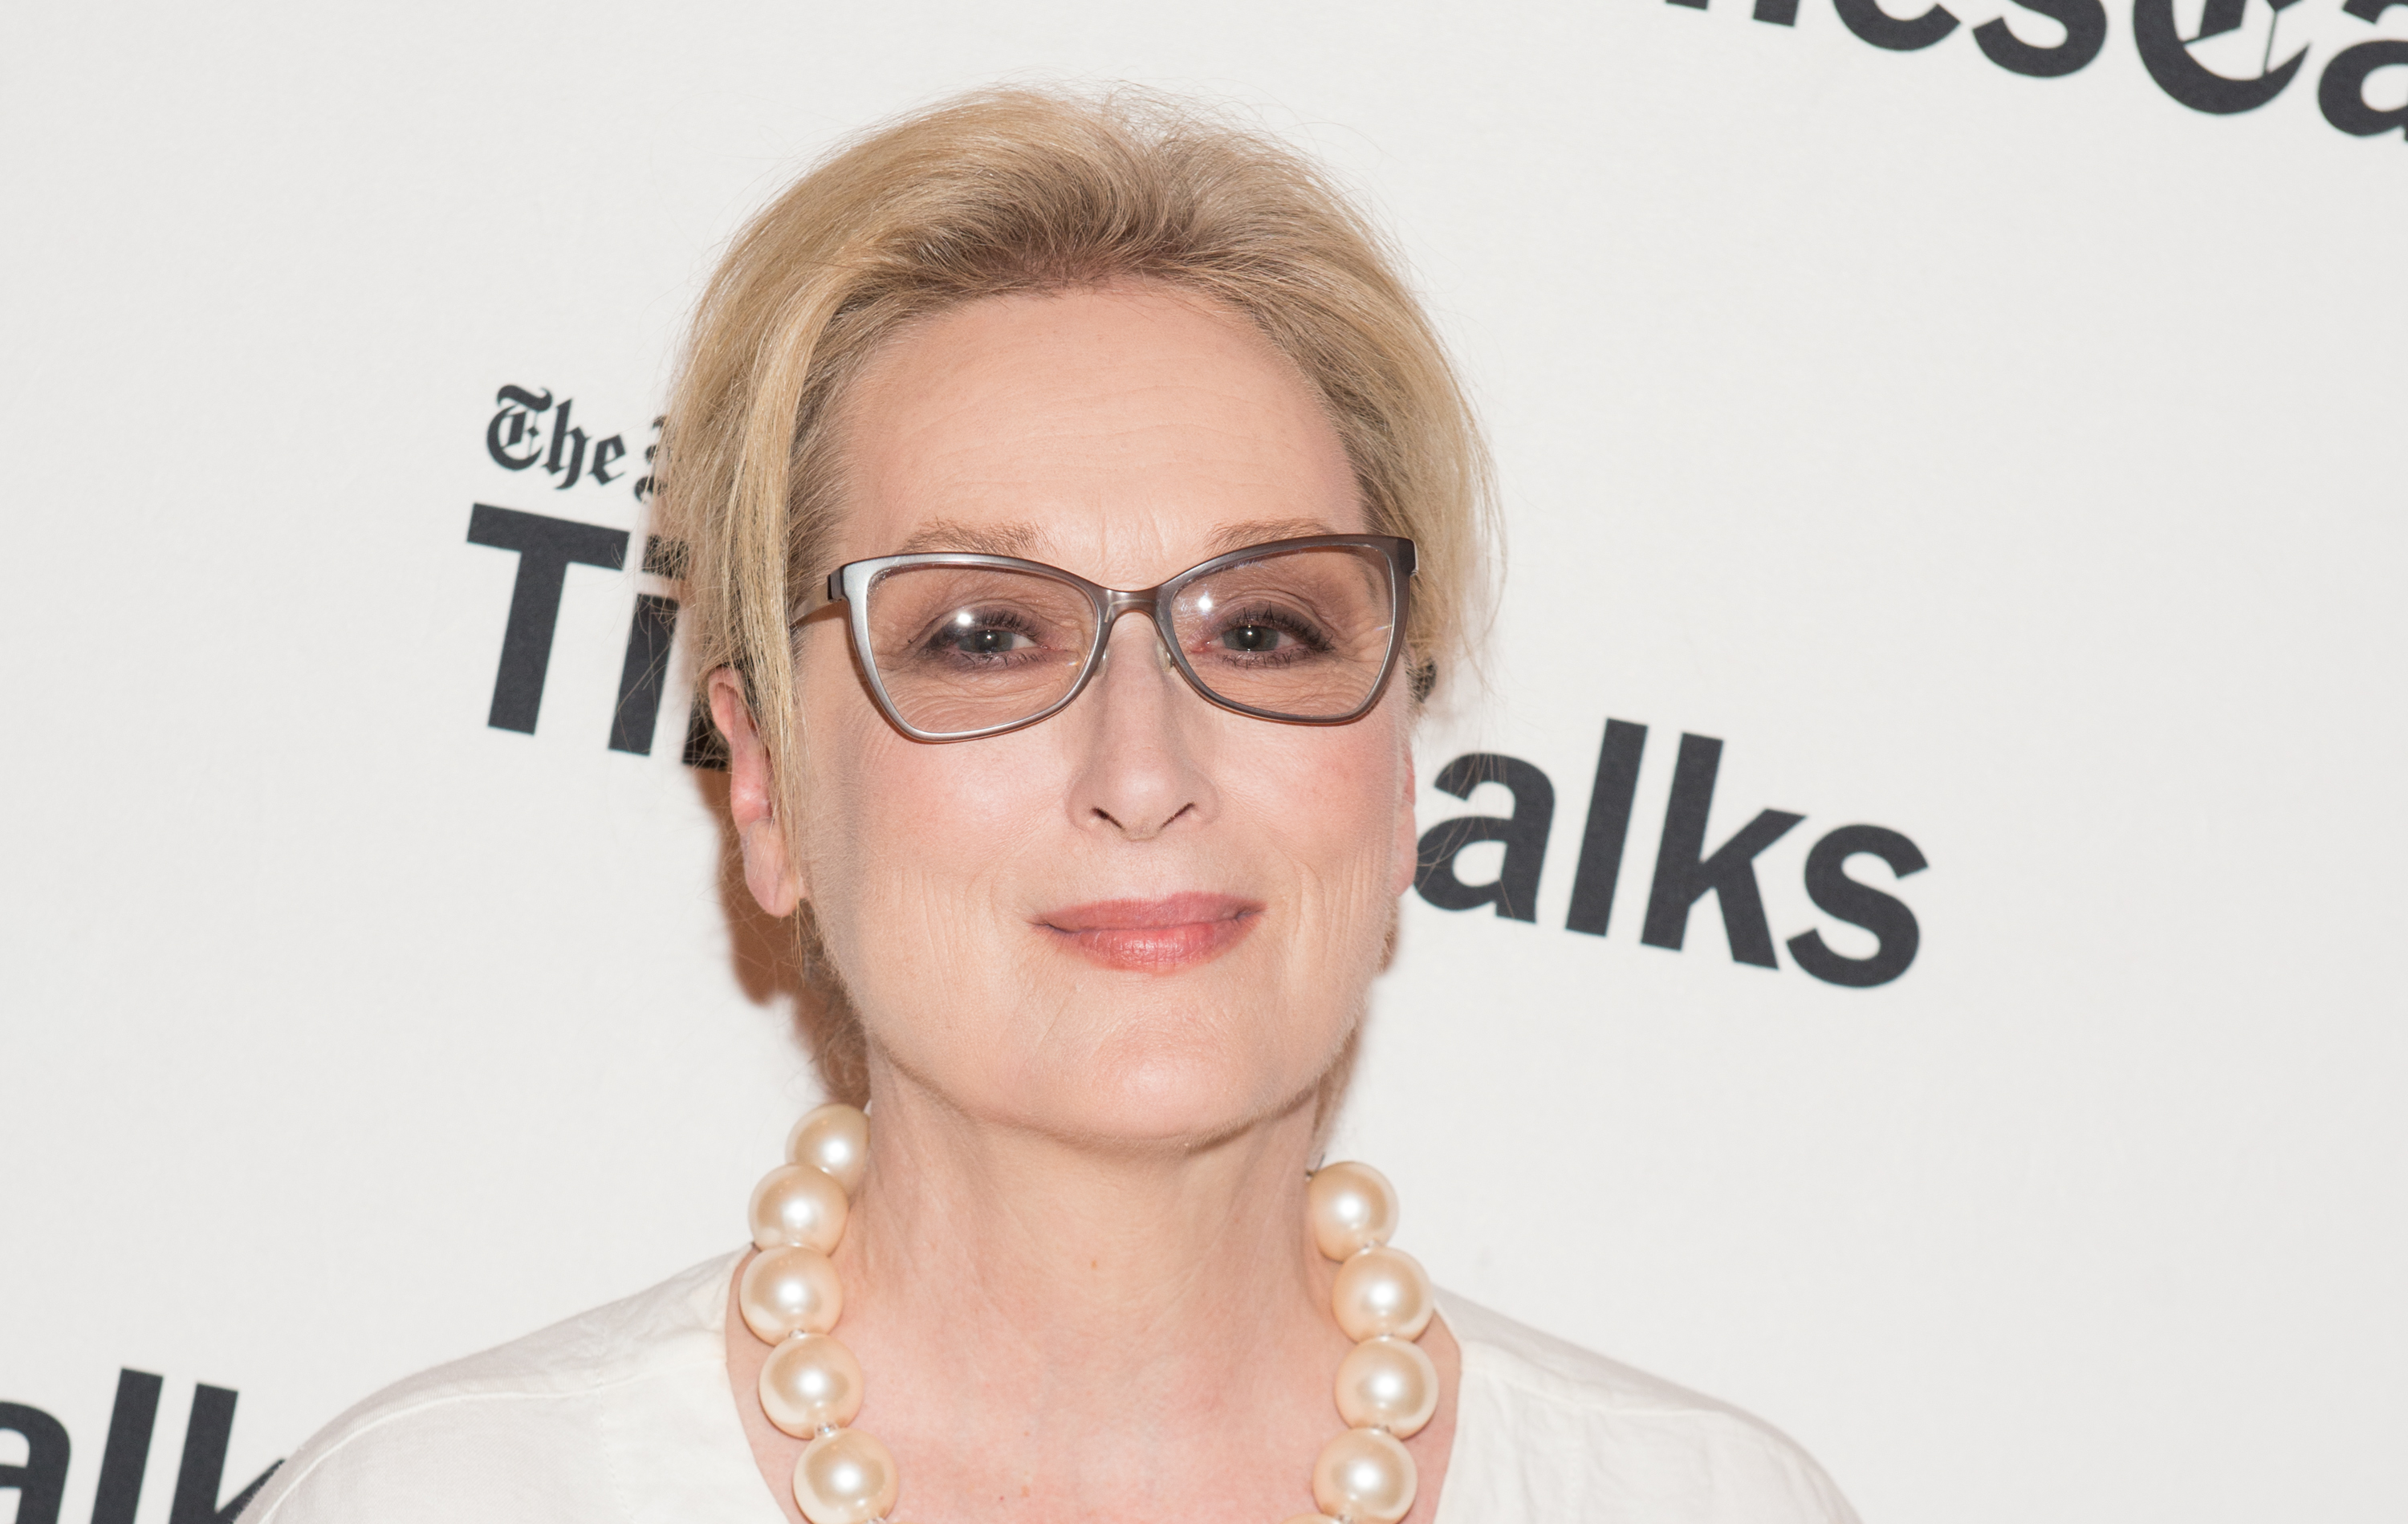 Actress Meryl Streep visits TimesTalks to discuss "Florence Foster Jenkins" at TheTimesCenter on August 11, 2016 in New York City. (Noam Galai—WireImage/Getty Images)